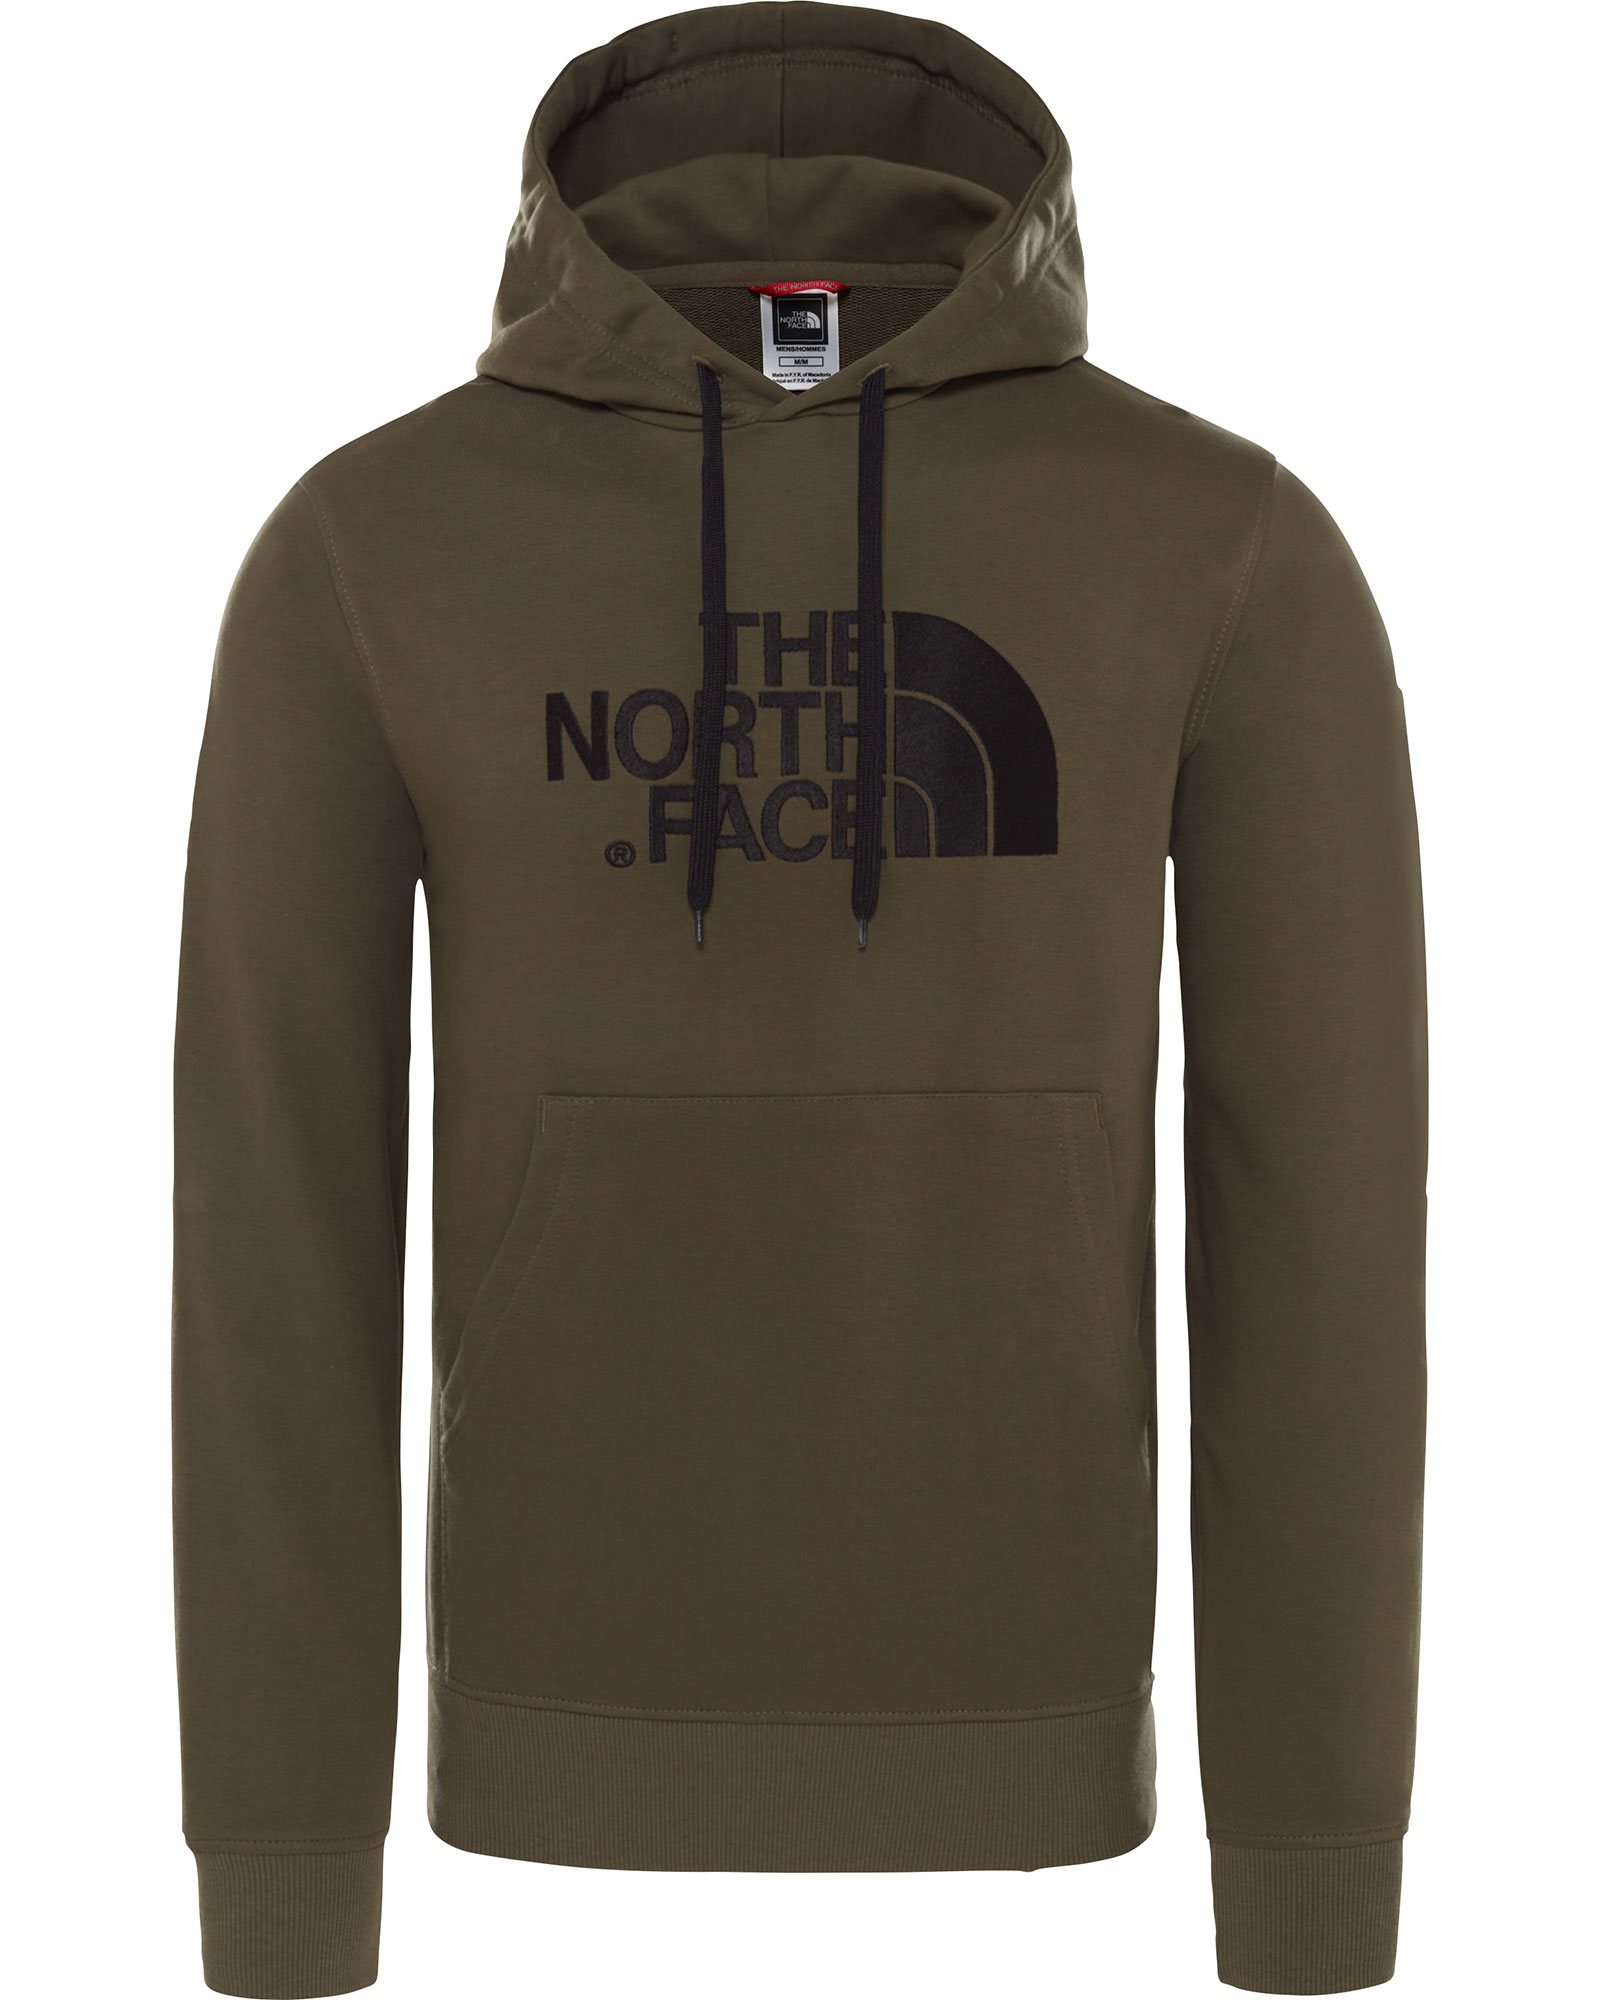 The North Face Men’s Light Drew Peak Pullover Hoodie - New Taupe Green XS